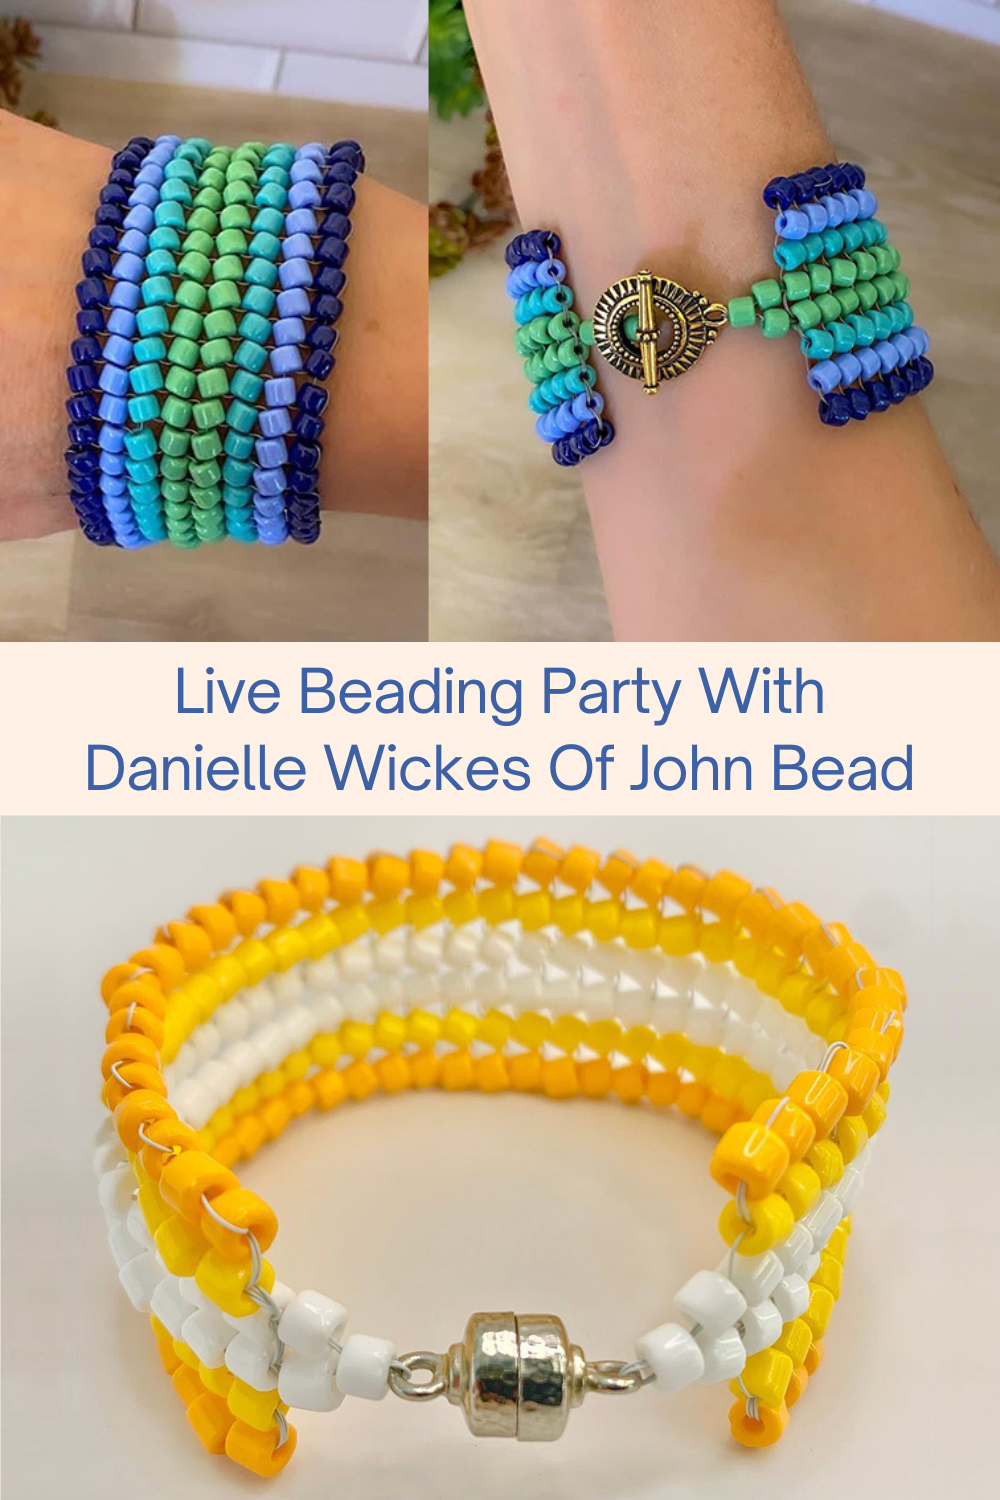 Live Beading Party With Danielle Wickes Of John Bead Collage